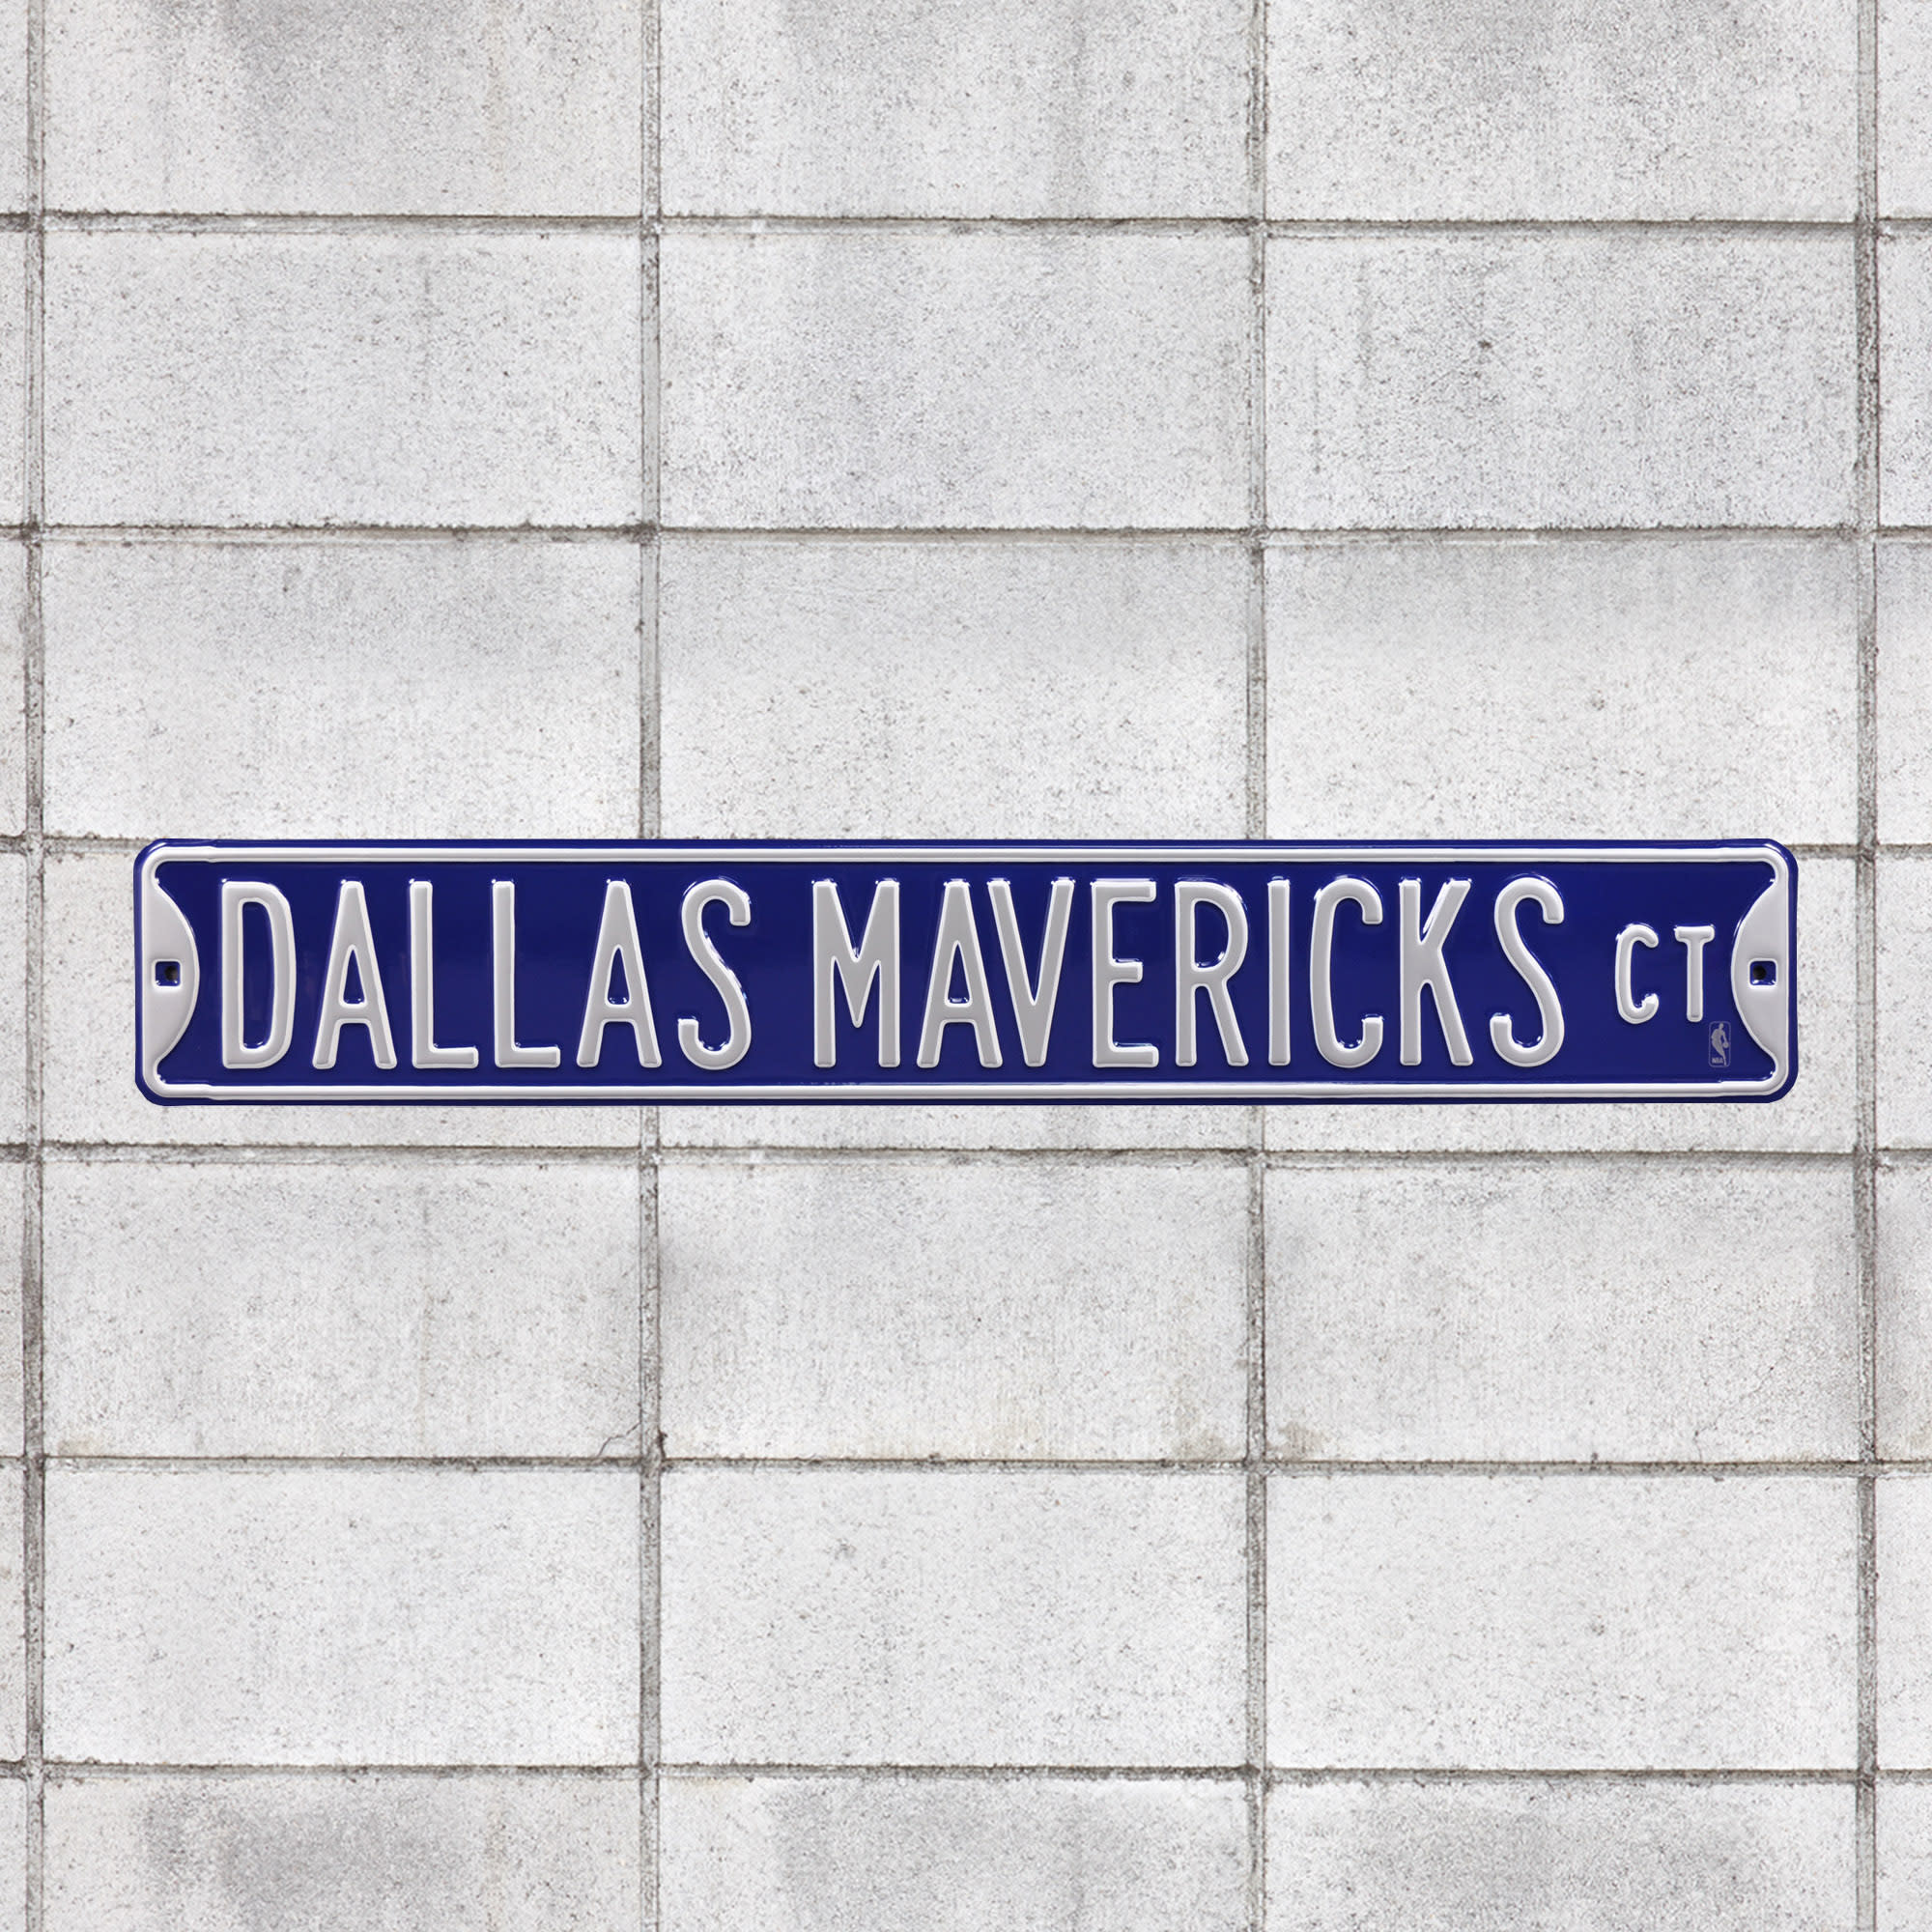 Dallas Mavericks: Court - Officially Licensed NBA Metal Street Sign 36.0"W x 6.0"H by Fathead | 100% Steel